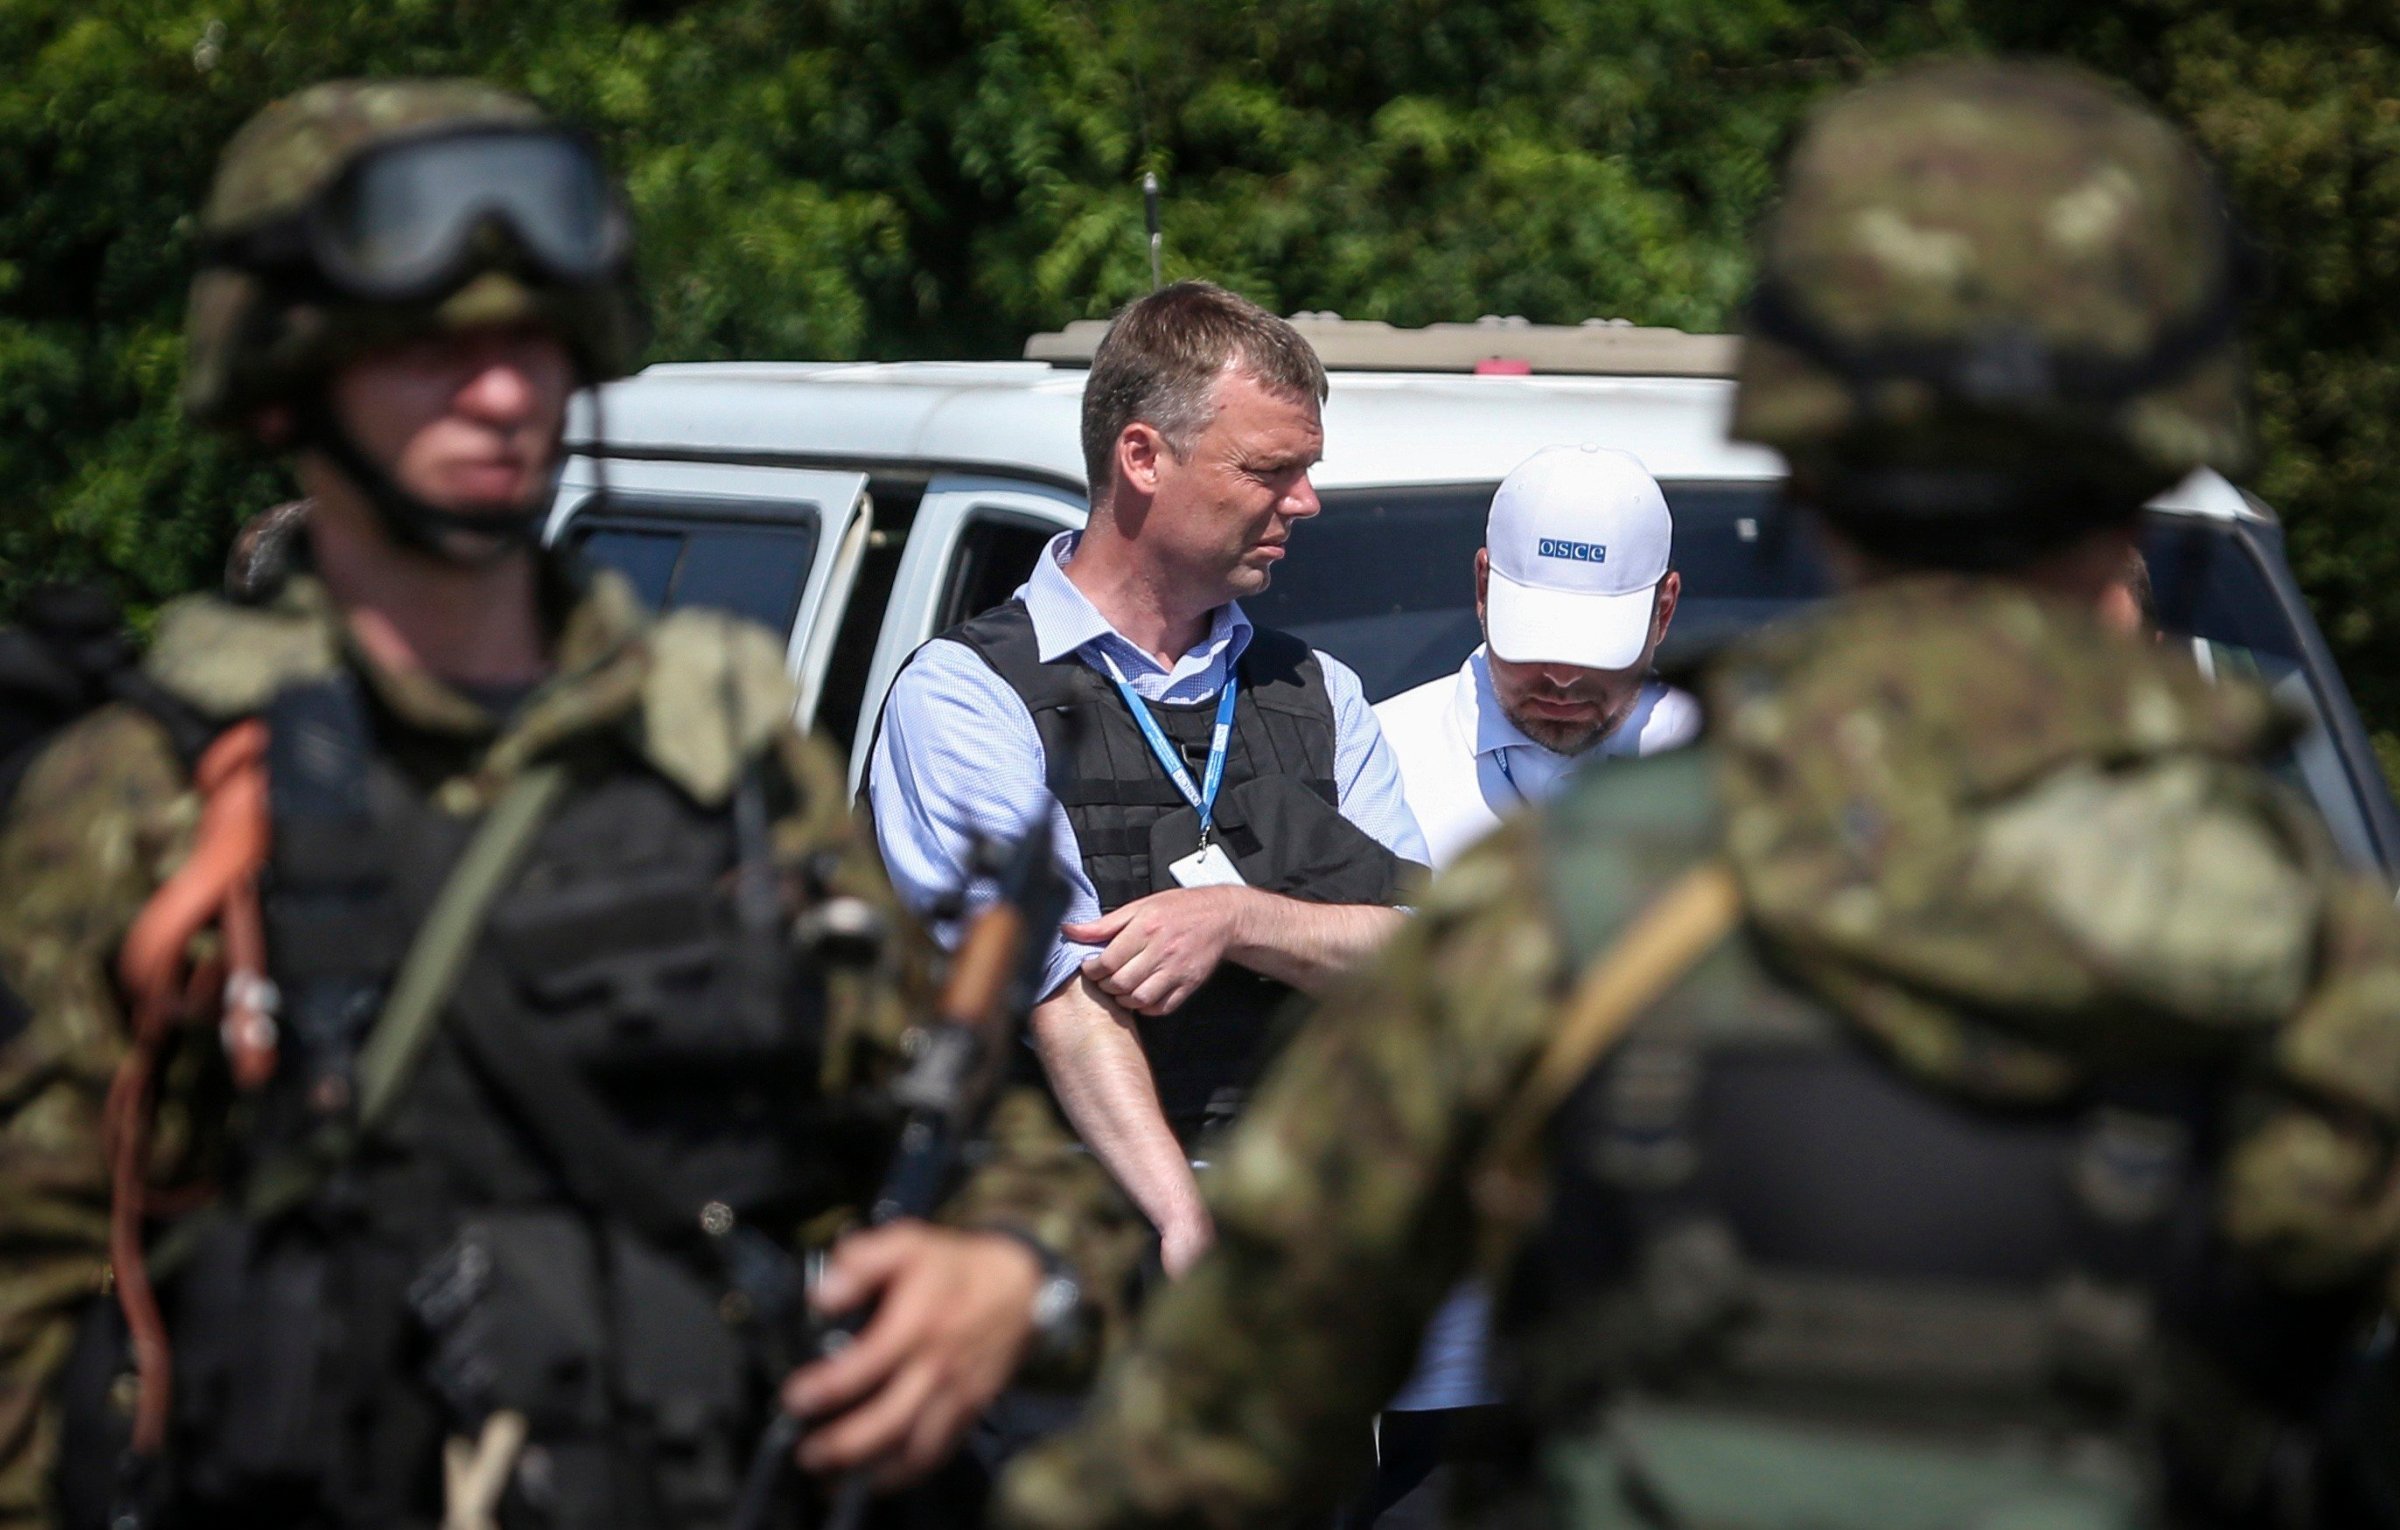 Alexander Hug deputy head for the Organisation for Security and Cooperation in Europe's (OSCE) monitoring mission in Ukraine, looks on next to armed pro-Russian separatists on the way to the Malaysia Airlines flight MH17 crash site, near Donetsk on July 30, 2014.